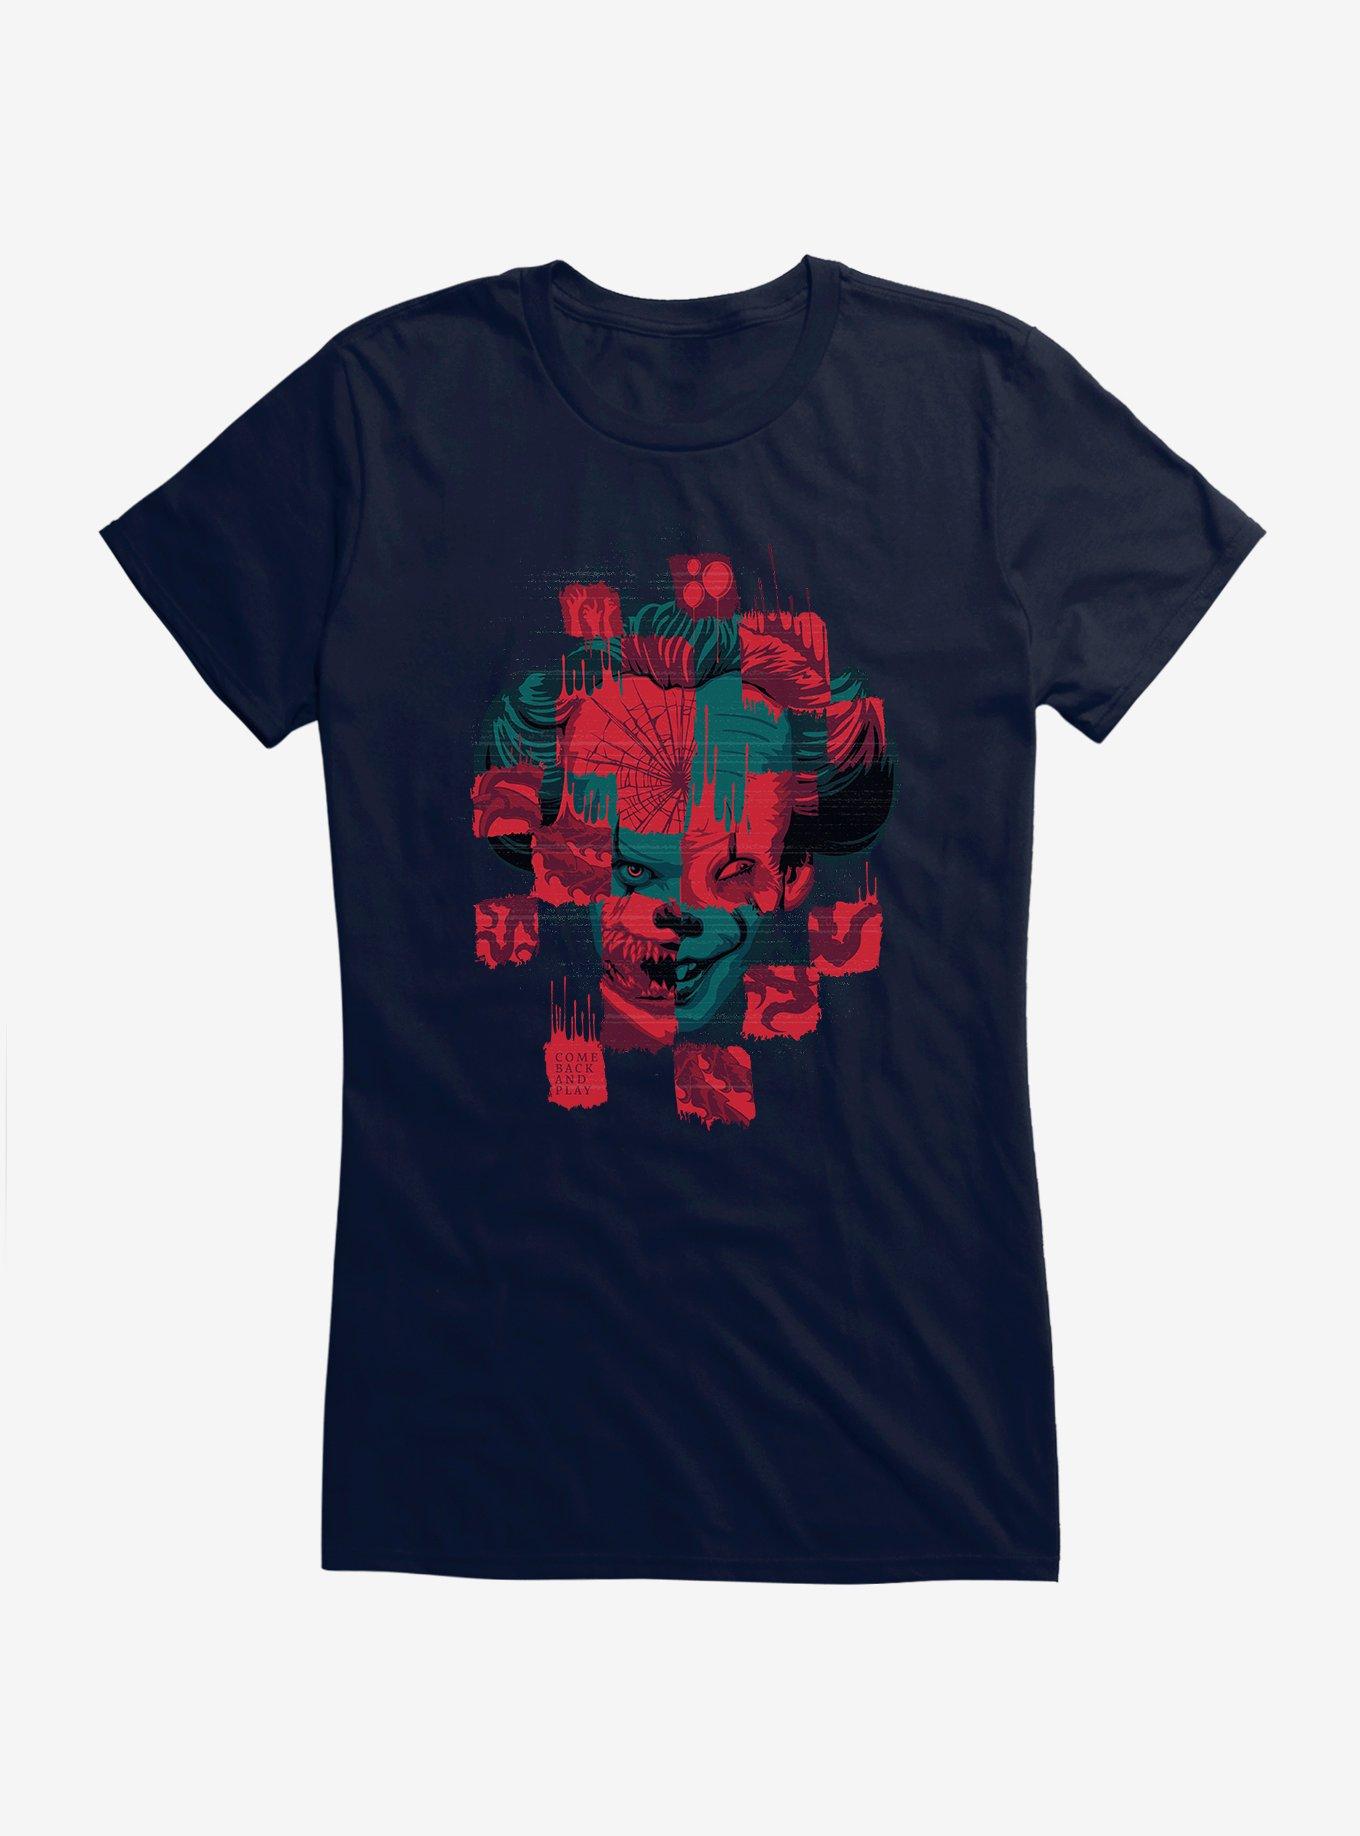 IT Chapter Two Pennywise Jumbled Girls T-Shirt, , hi-res